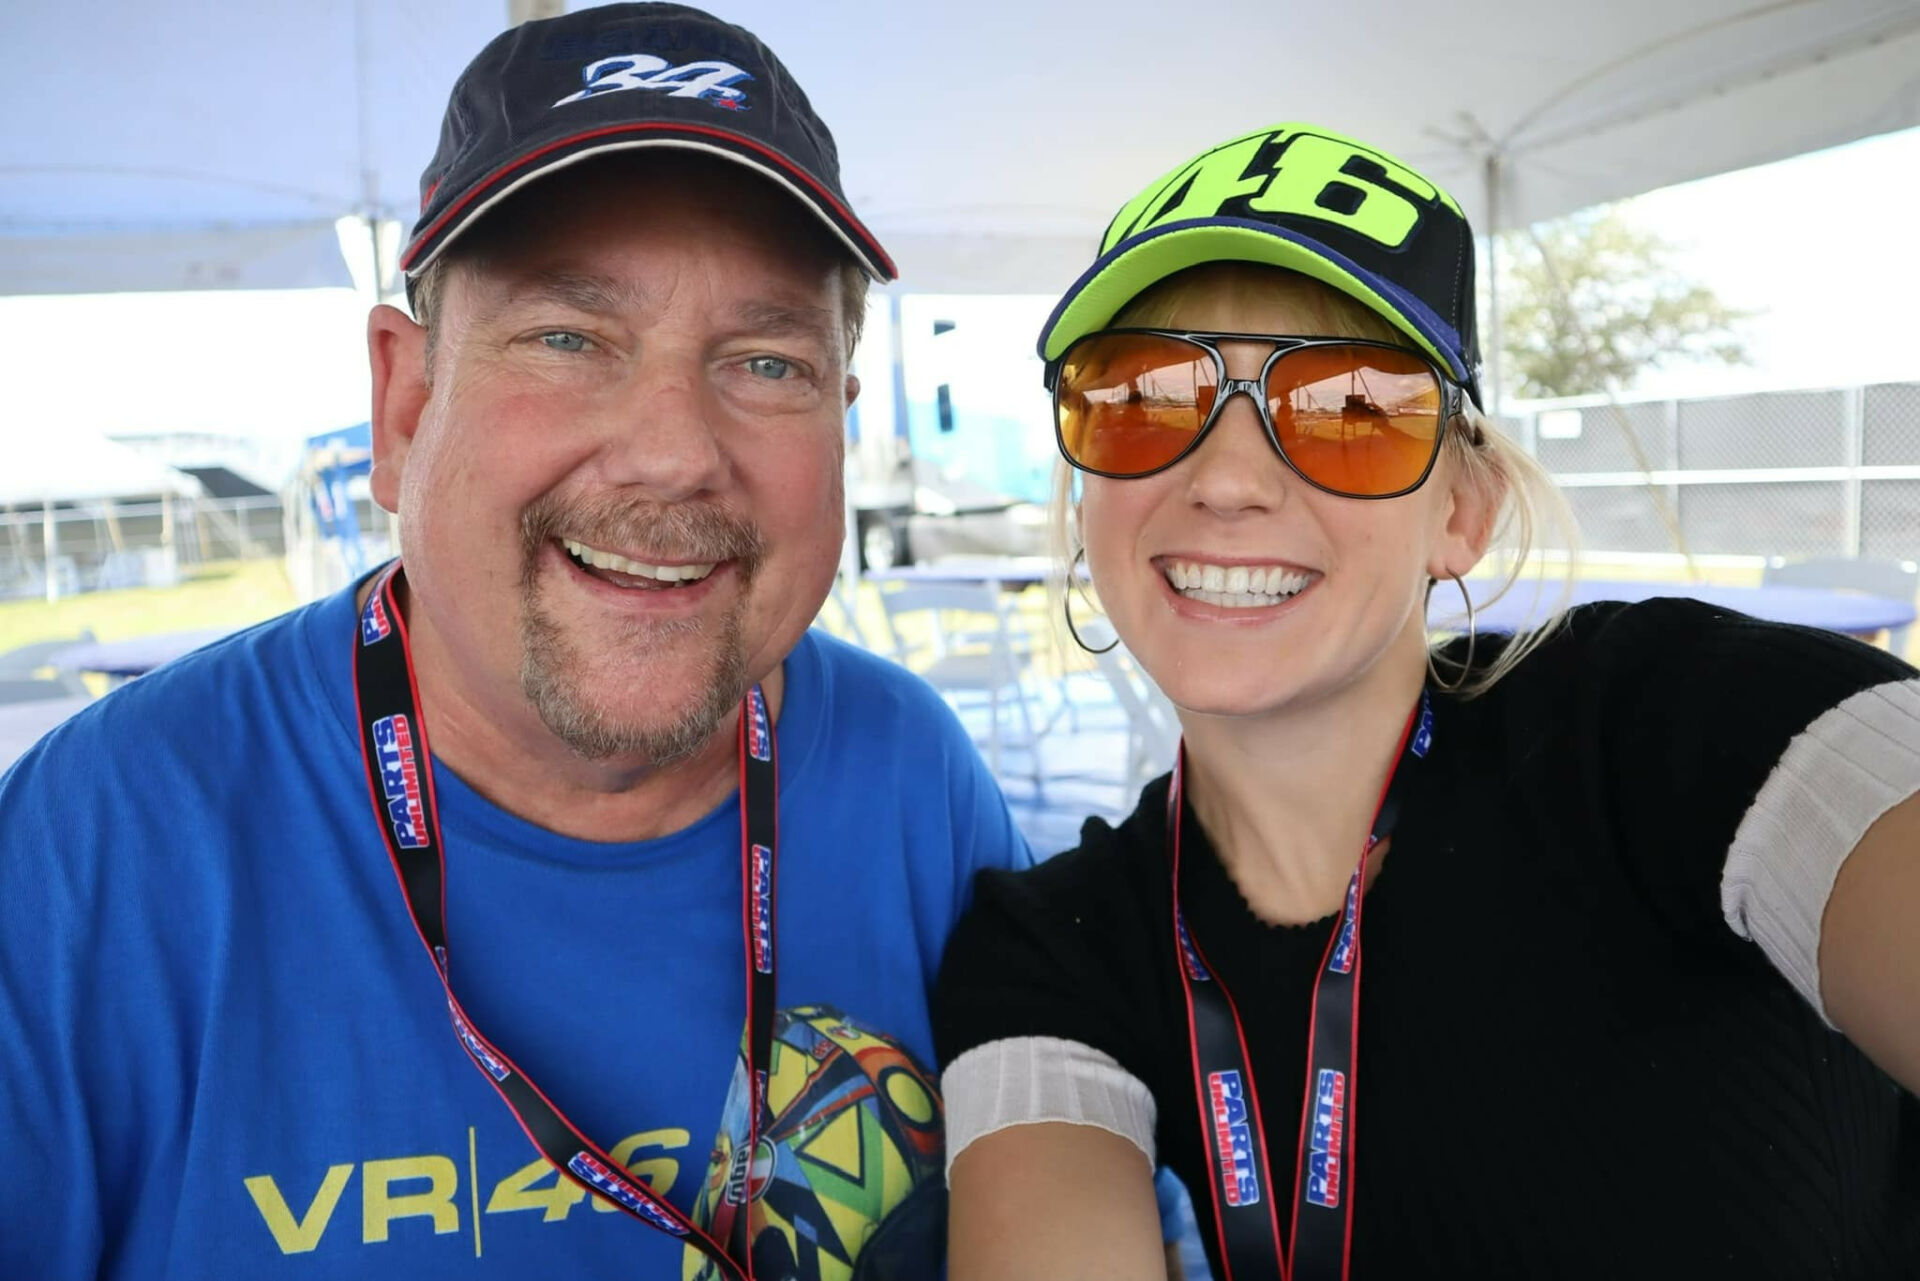 Garry Gallagher and his daughter Mikaela Novak at the Red Bull Grand Prix of The Americas at Circuit of The Americas.